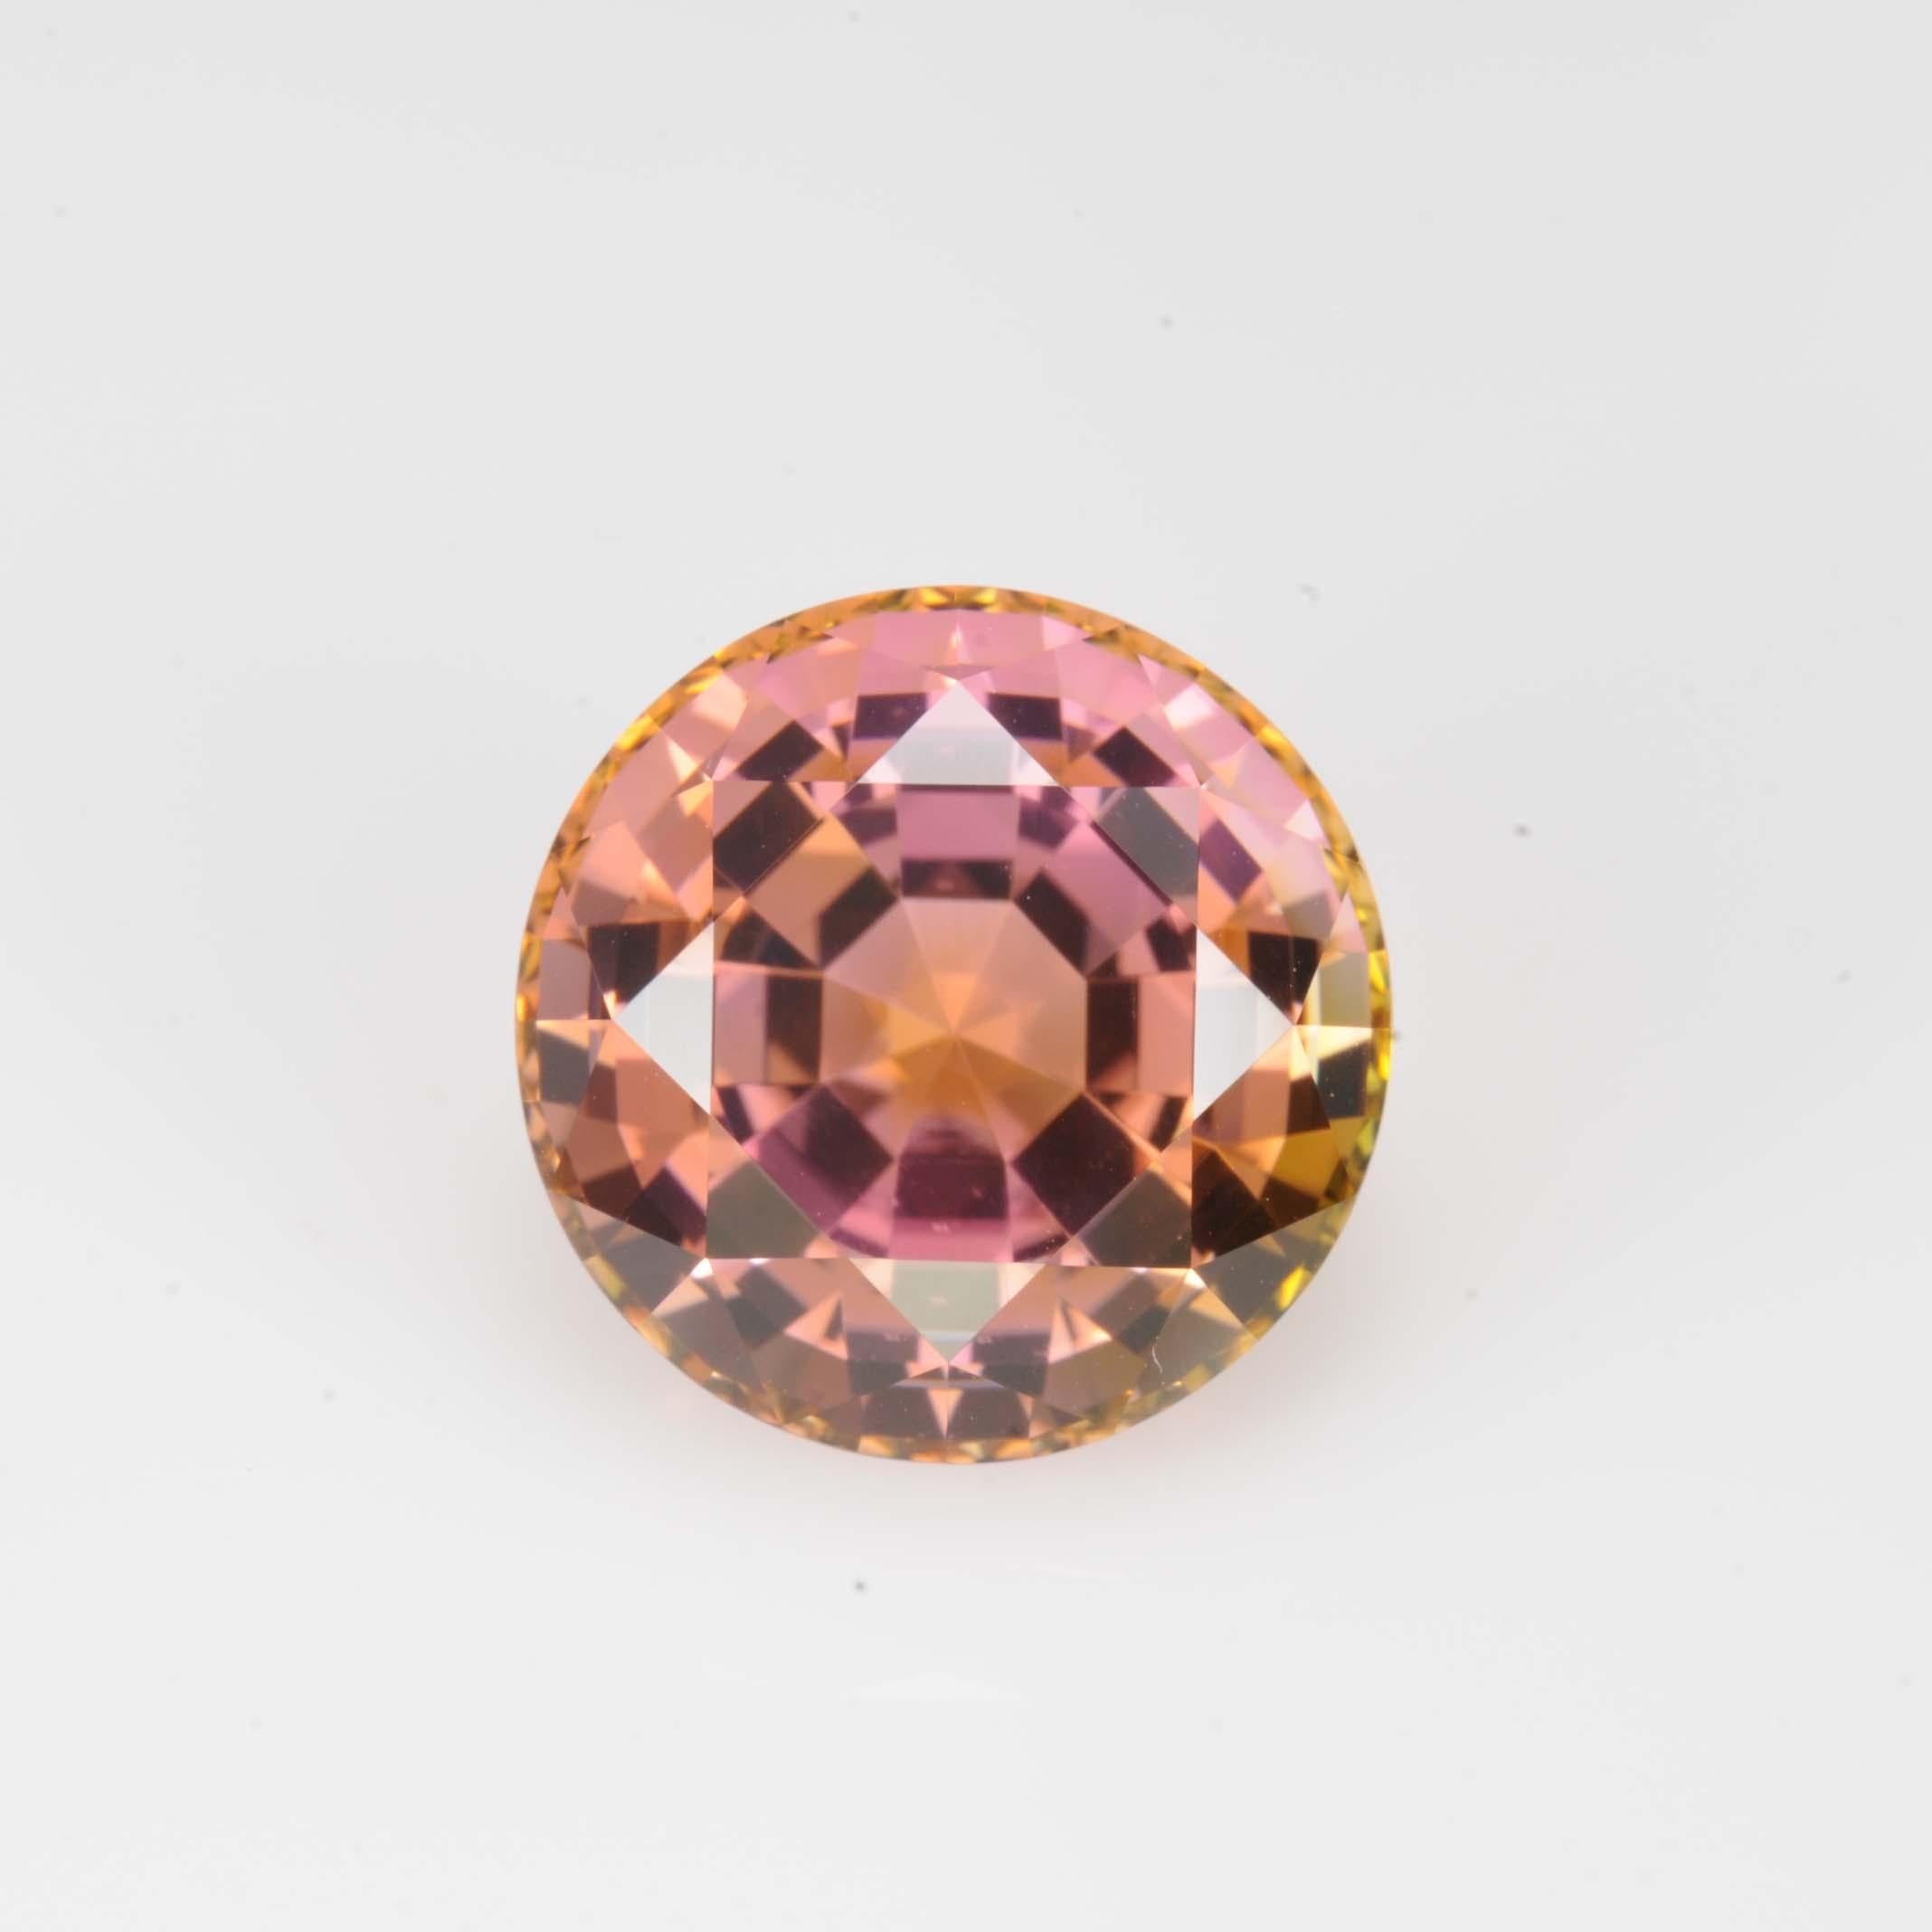 Exceptional 14.28 carat Autumn Bicolor Tourmaline round gem, offered loose to someone special.
Returns are accepted and paid by us within 7 days of delivery.
We offer supreme custom jewelry work upon request. Please contact us for more details.
For